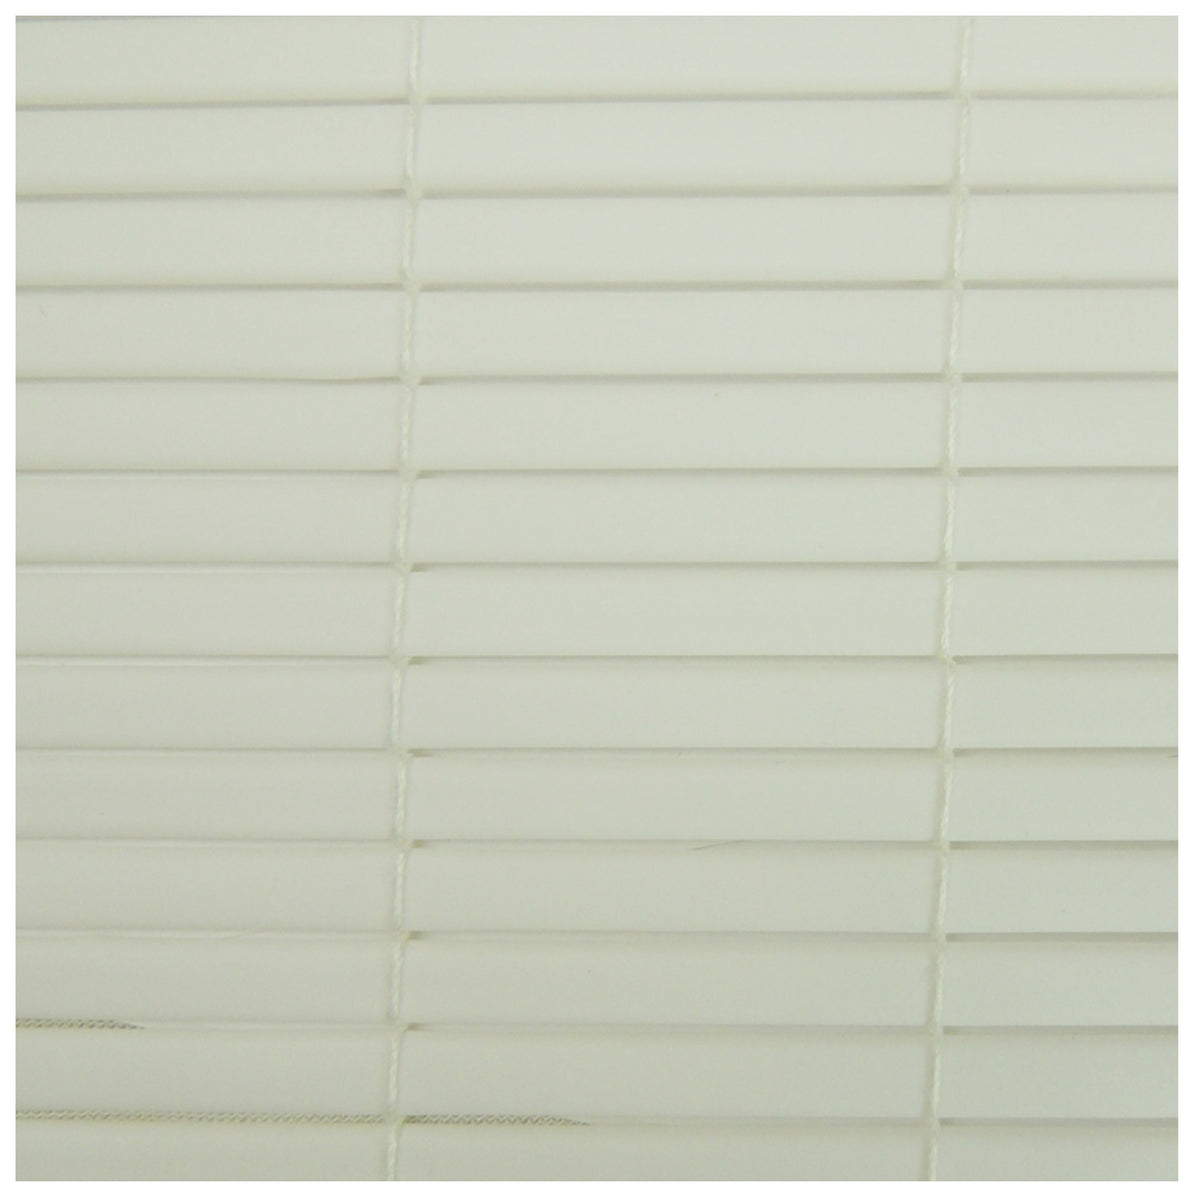 Radiance 3320146 Rollup Shade, 48" x 72"